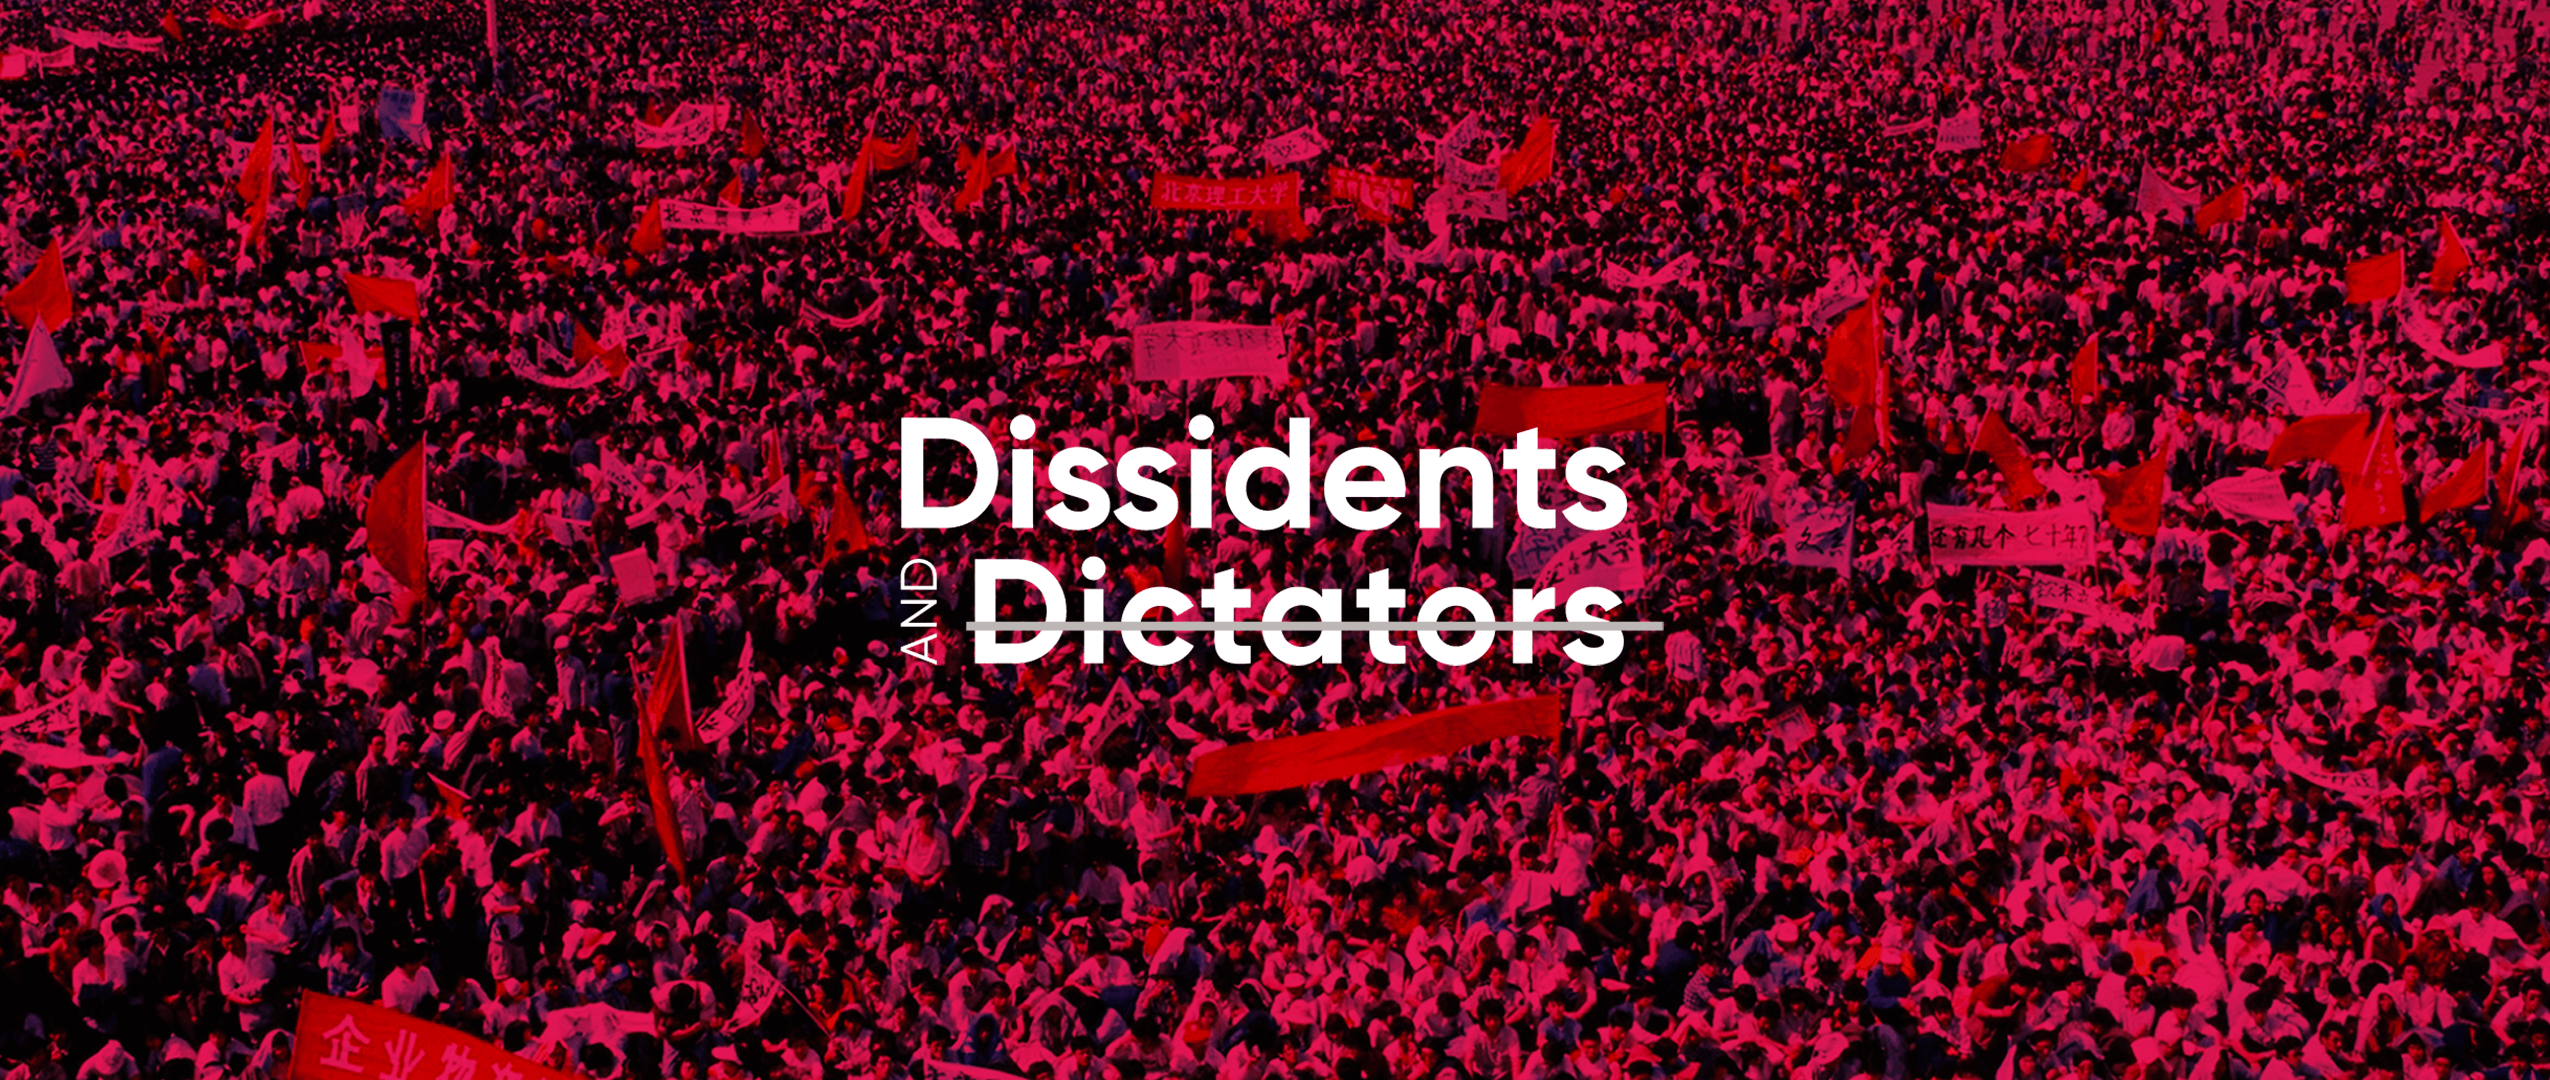 Introducing HRF’s new podcast: Dissidents and Dictators